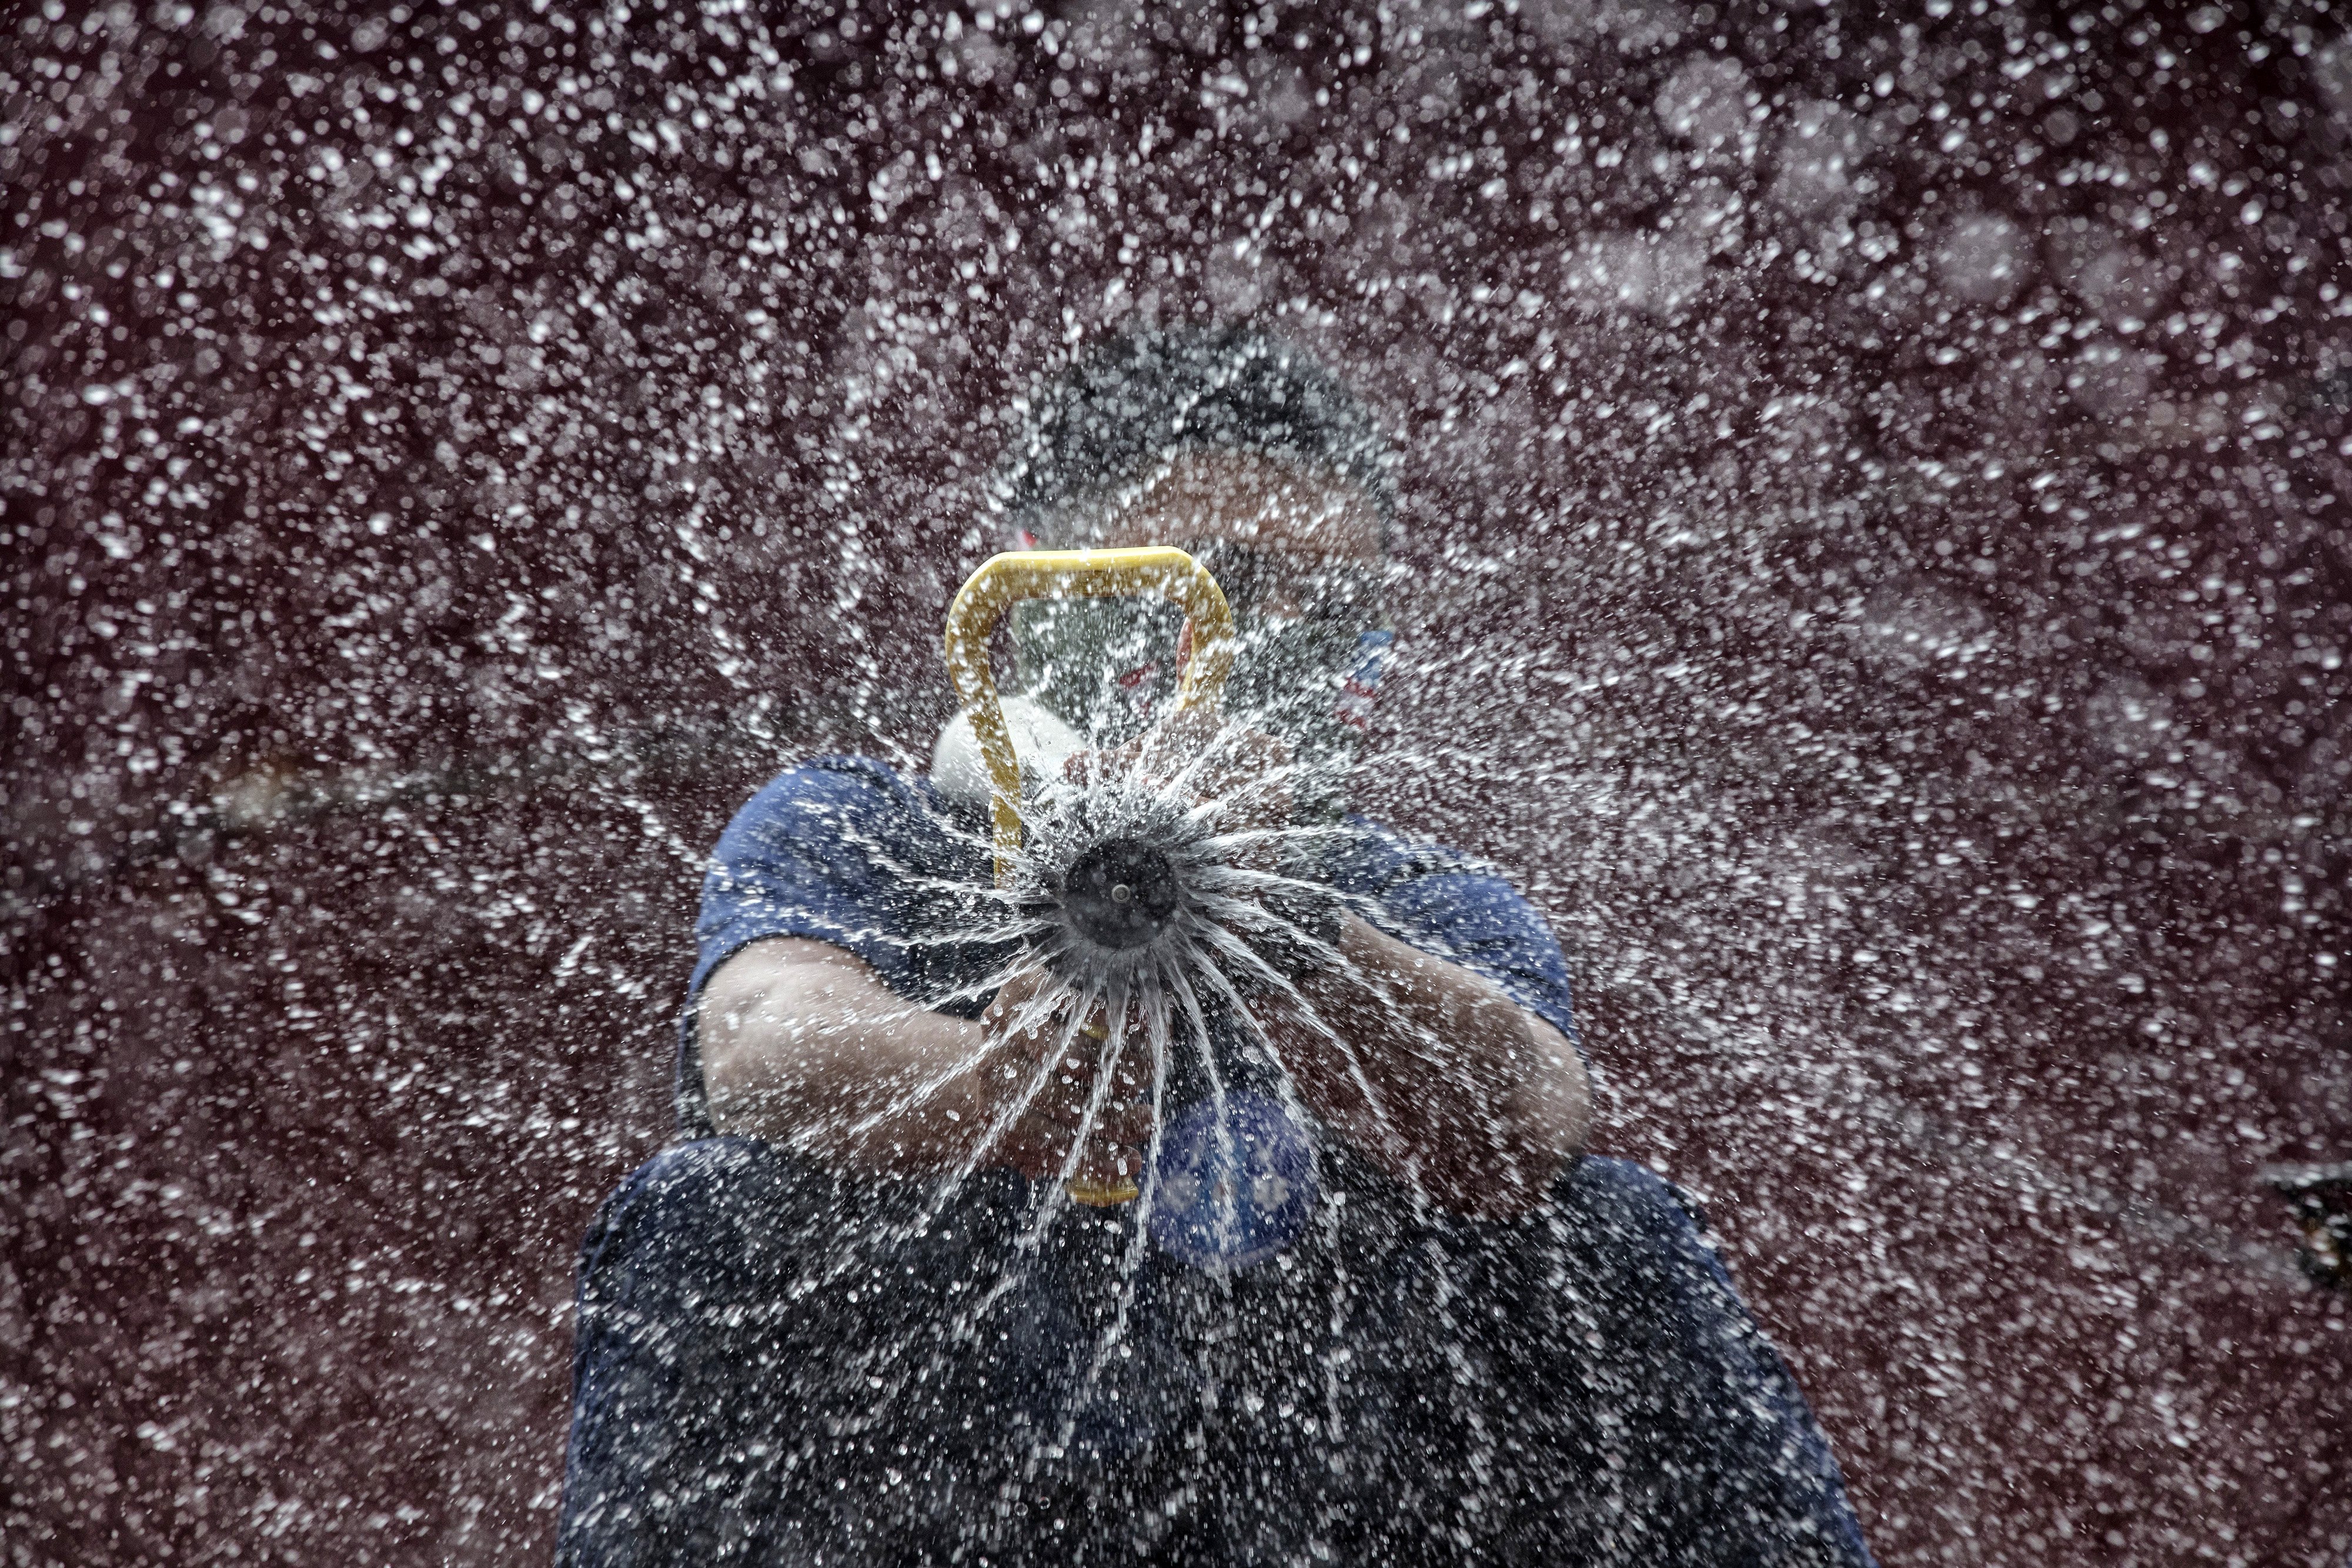 A disinfection worker sprays anti-septic solution against COVID-19 aboard a firetruck along a street on March 11, 2020 in Manila, Philippines. Picture: Ezra Acayan